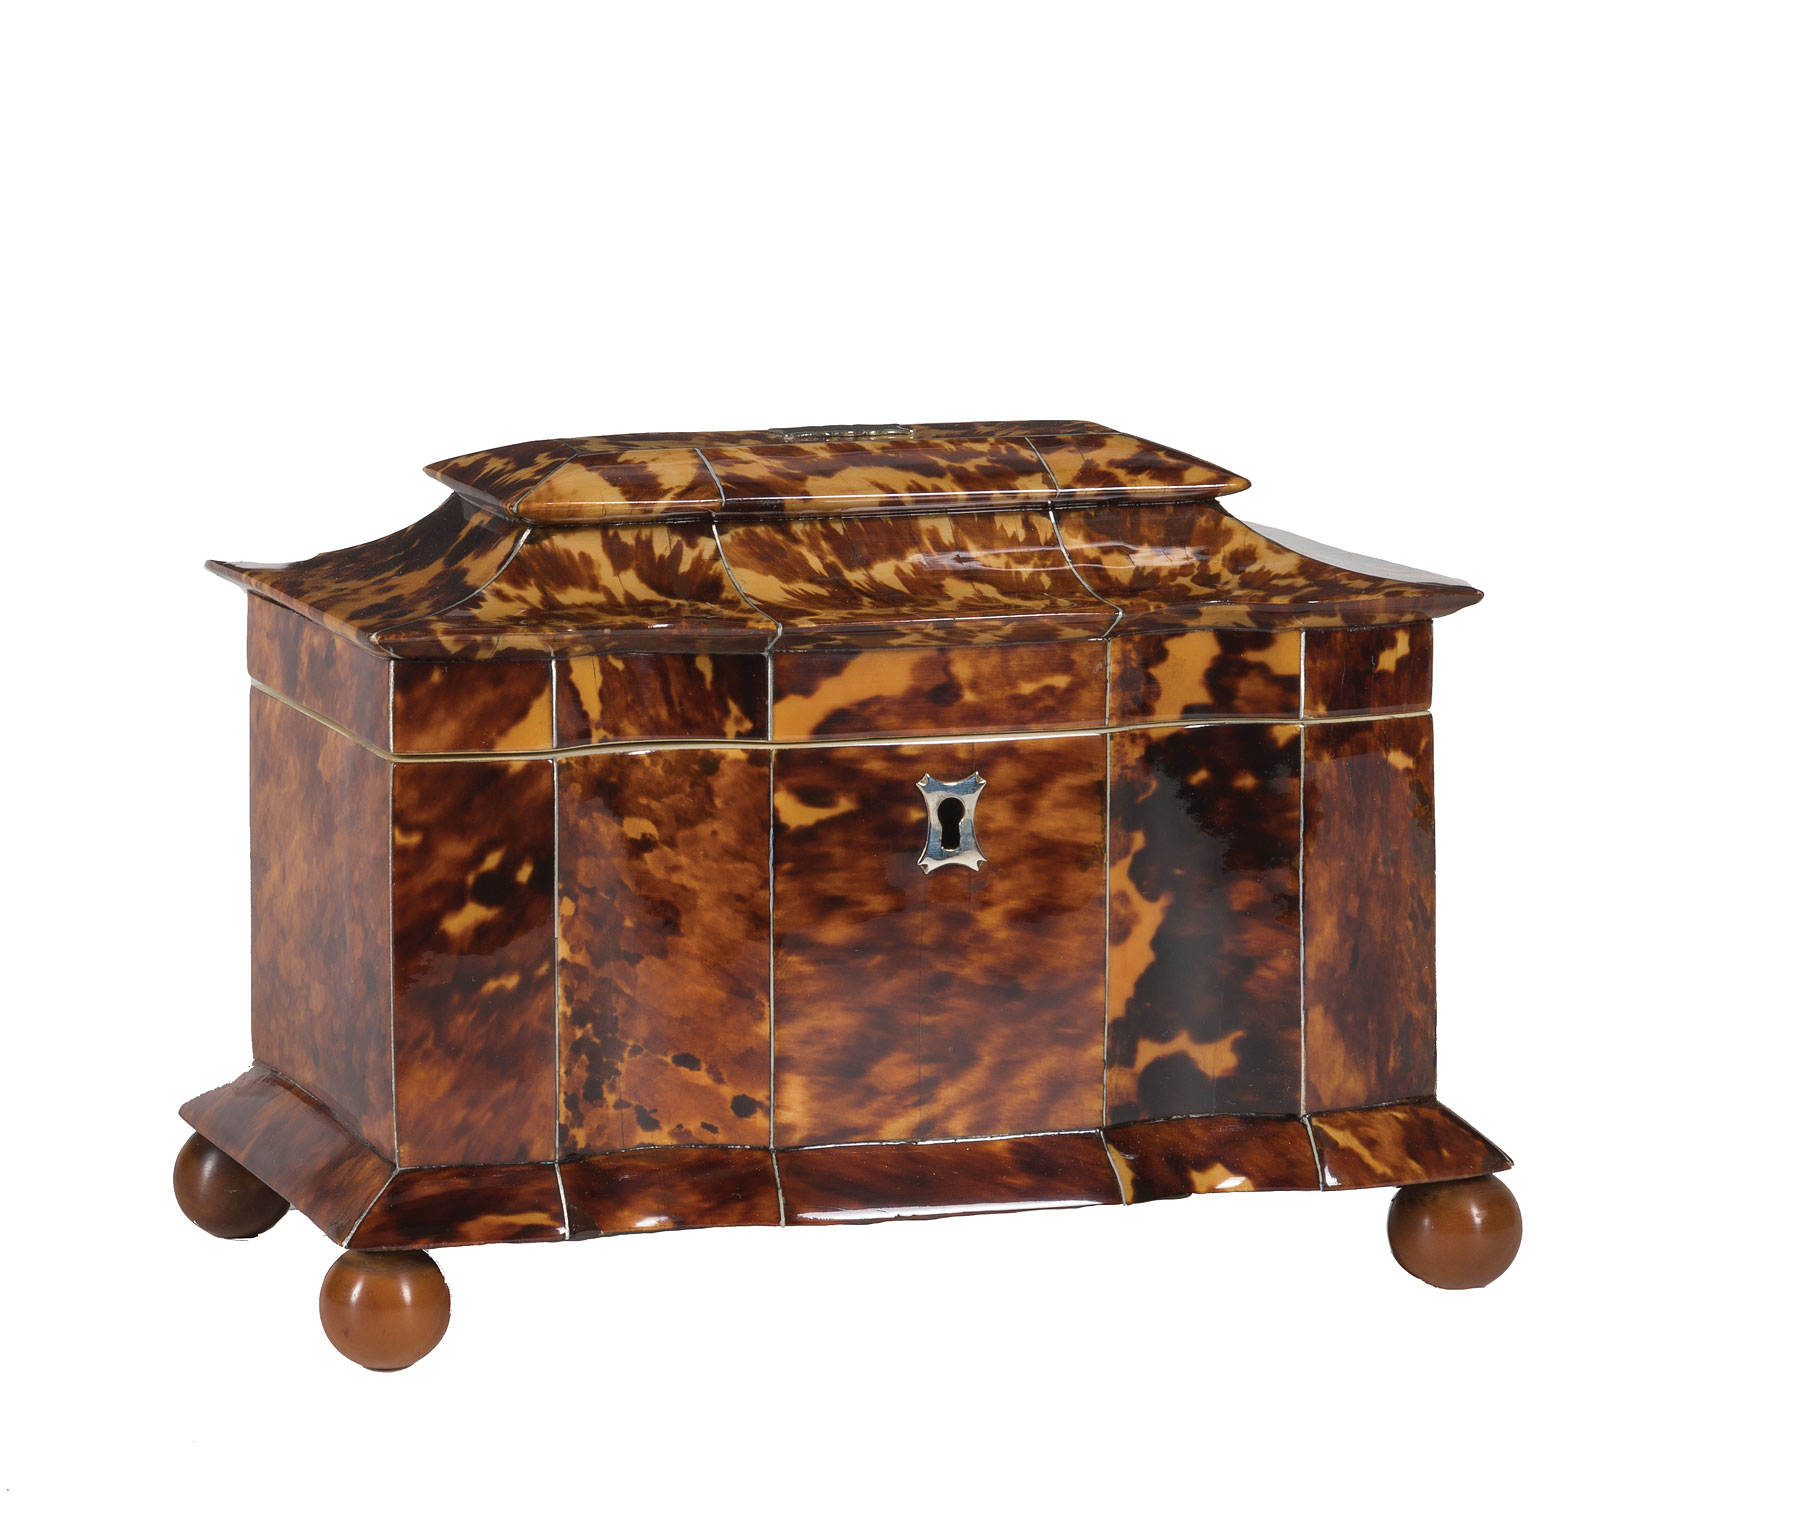 George III Tortoiseshell Sarcophagus-Form Tea Caddy , early 19th c., interior with two lidded